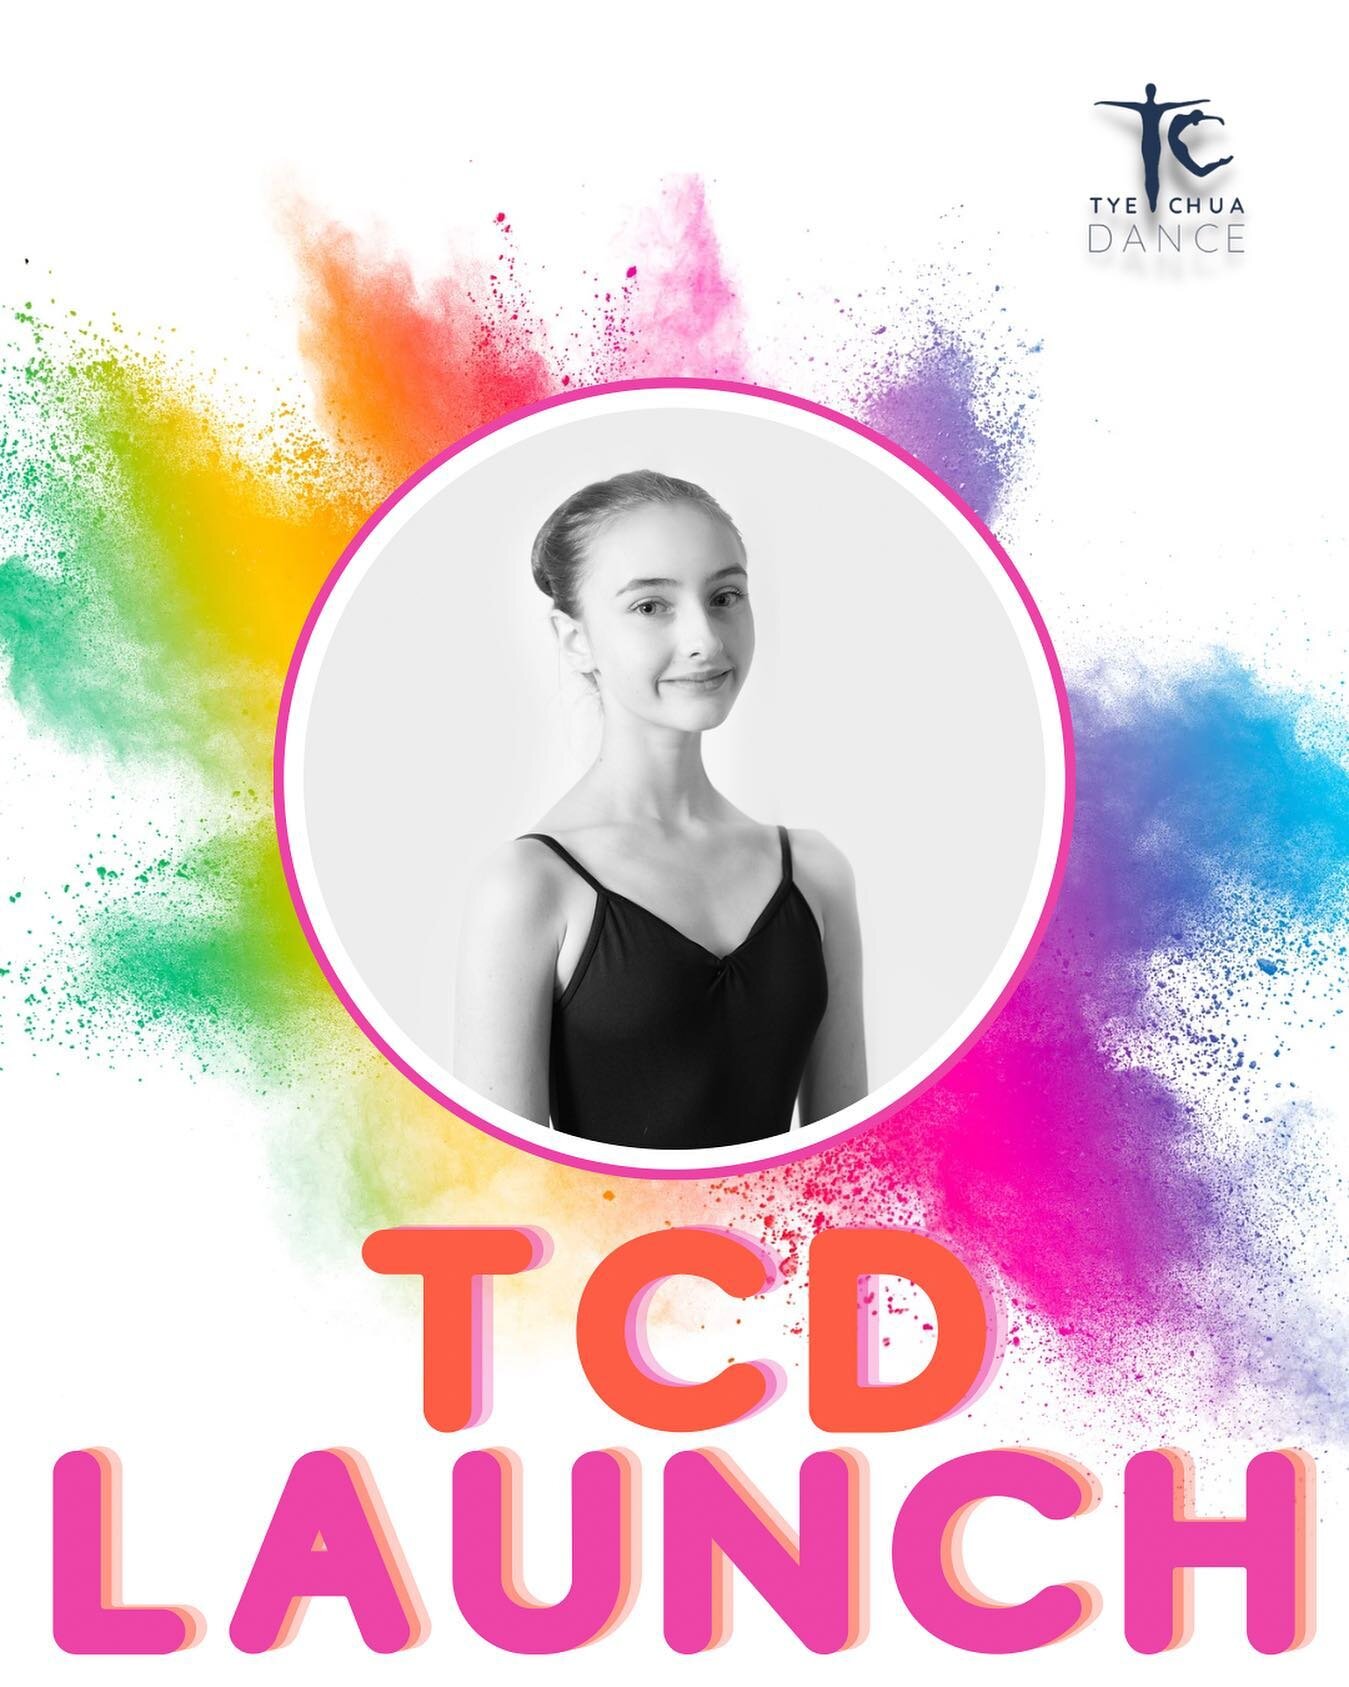 We have a Tye Chua Dancer Launch to share! 🎉

Our lovely dancer Josephine Deike recently completed a four week intensive at Canada's National Ballet School - an accomplishment to be proud of already!

We're thrilled to announce that Josie has been s